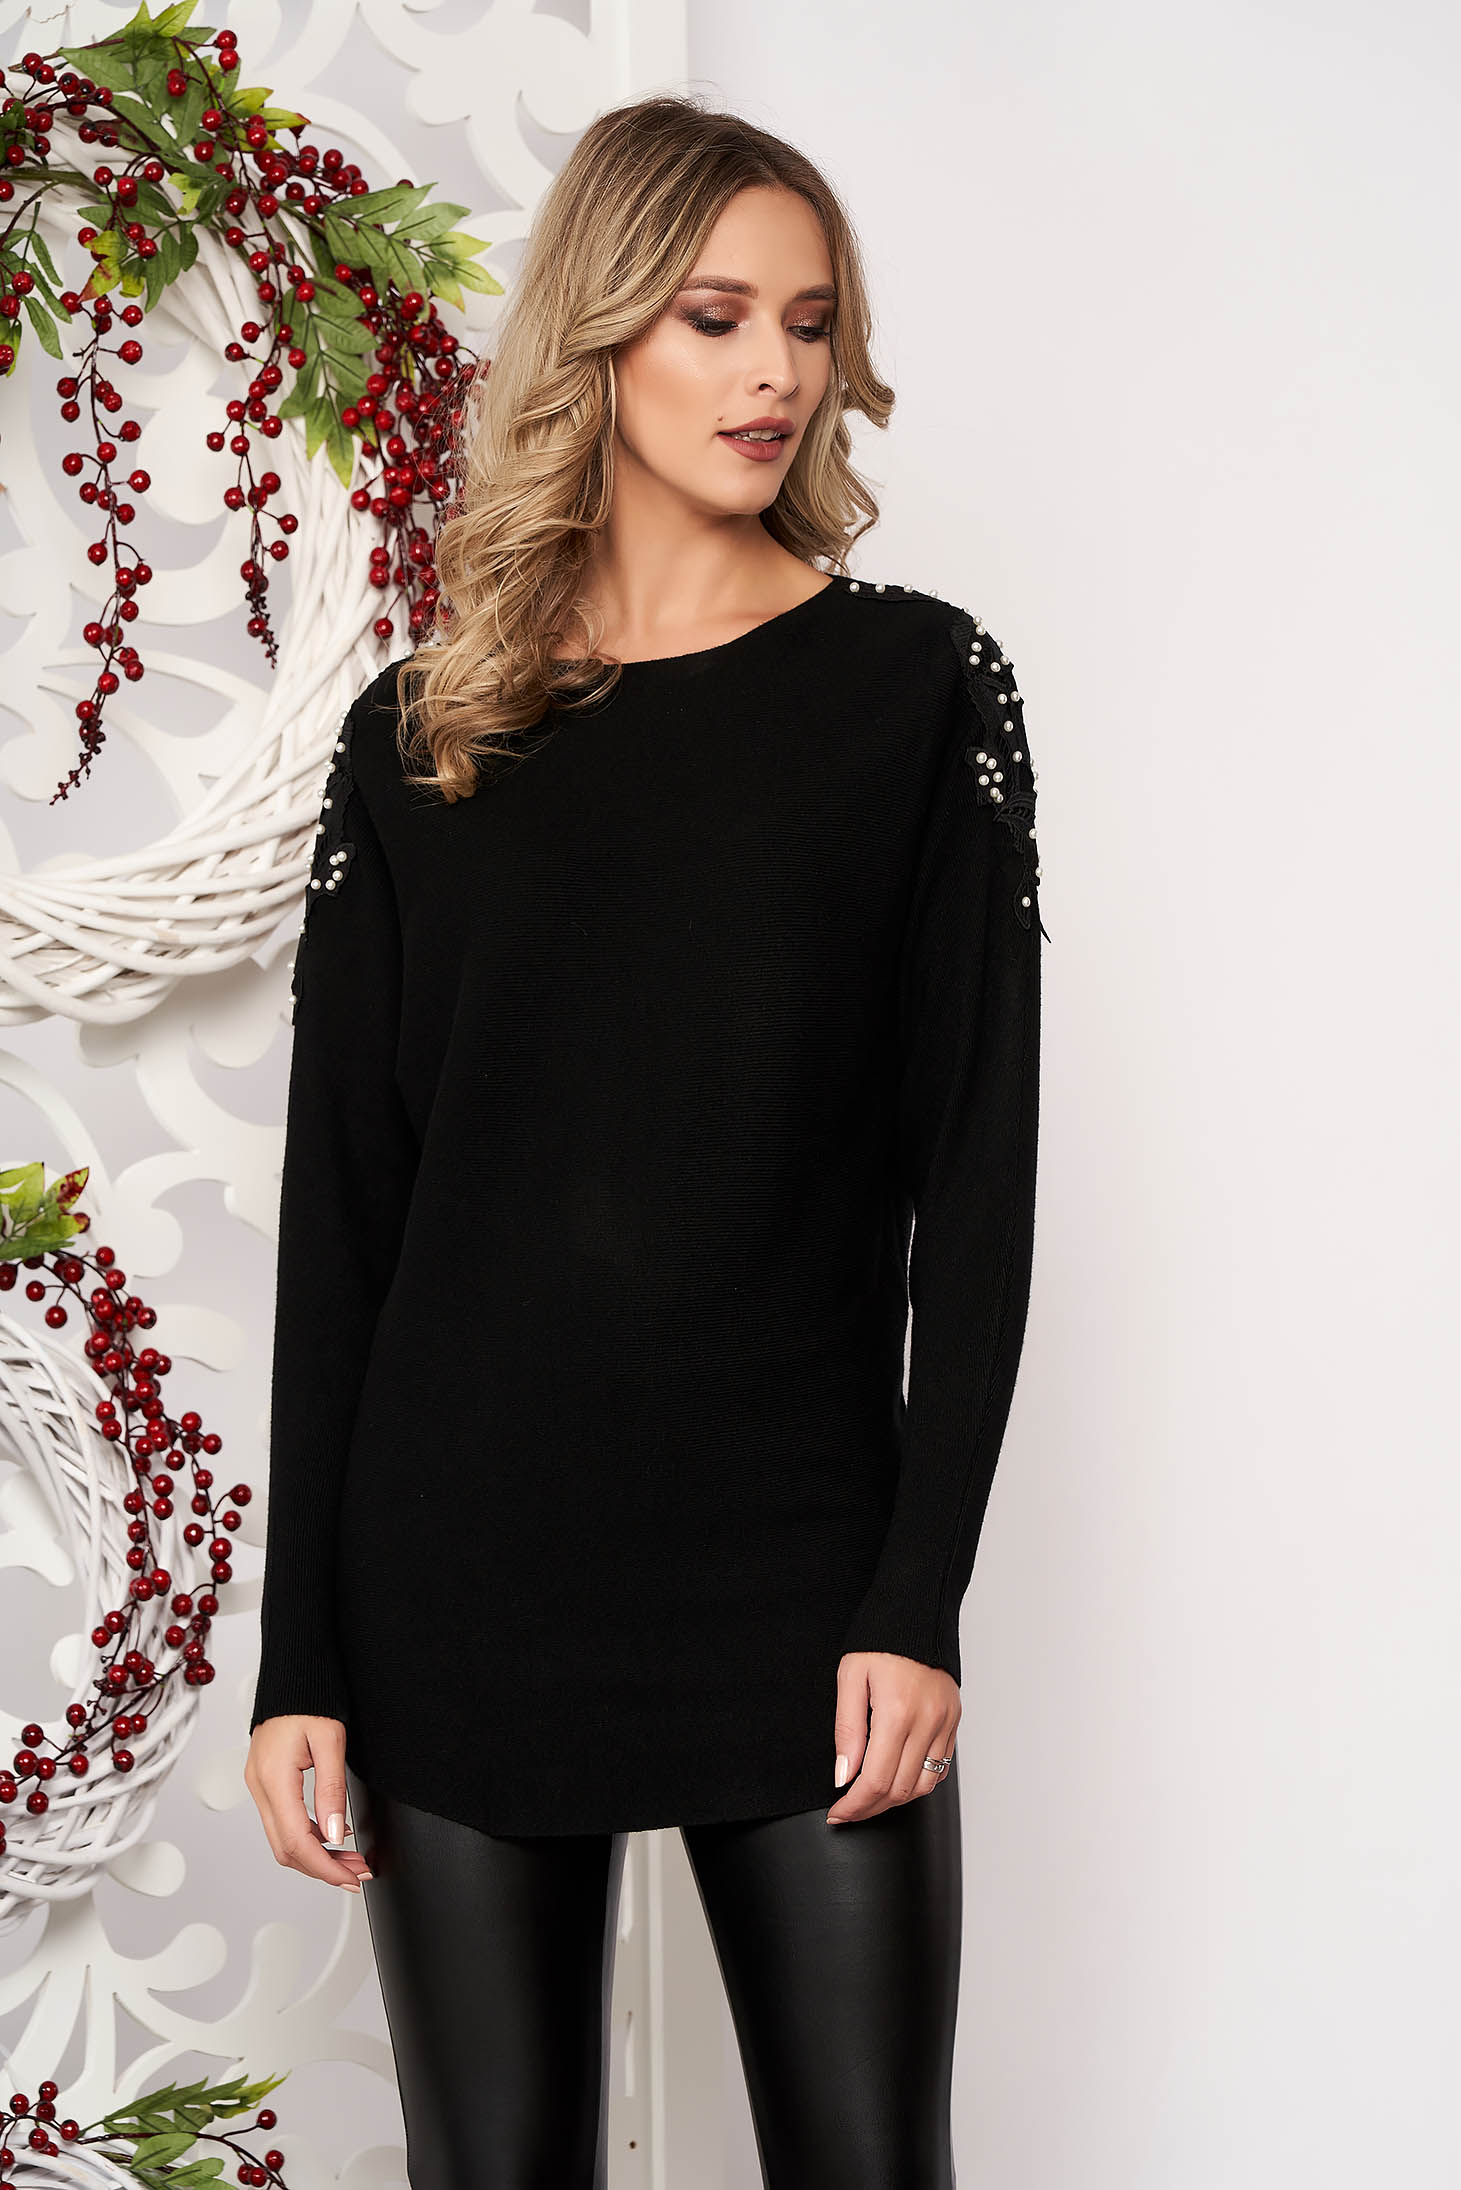 Black sweater long sleeved with lace details knitted fabric long sleeve ...